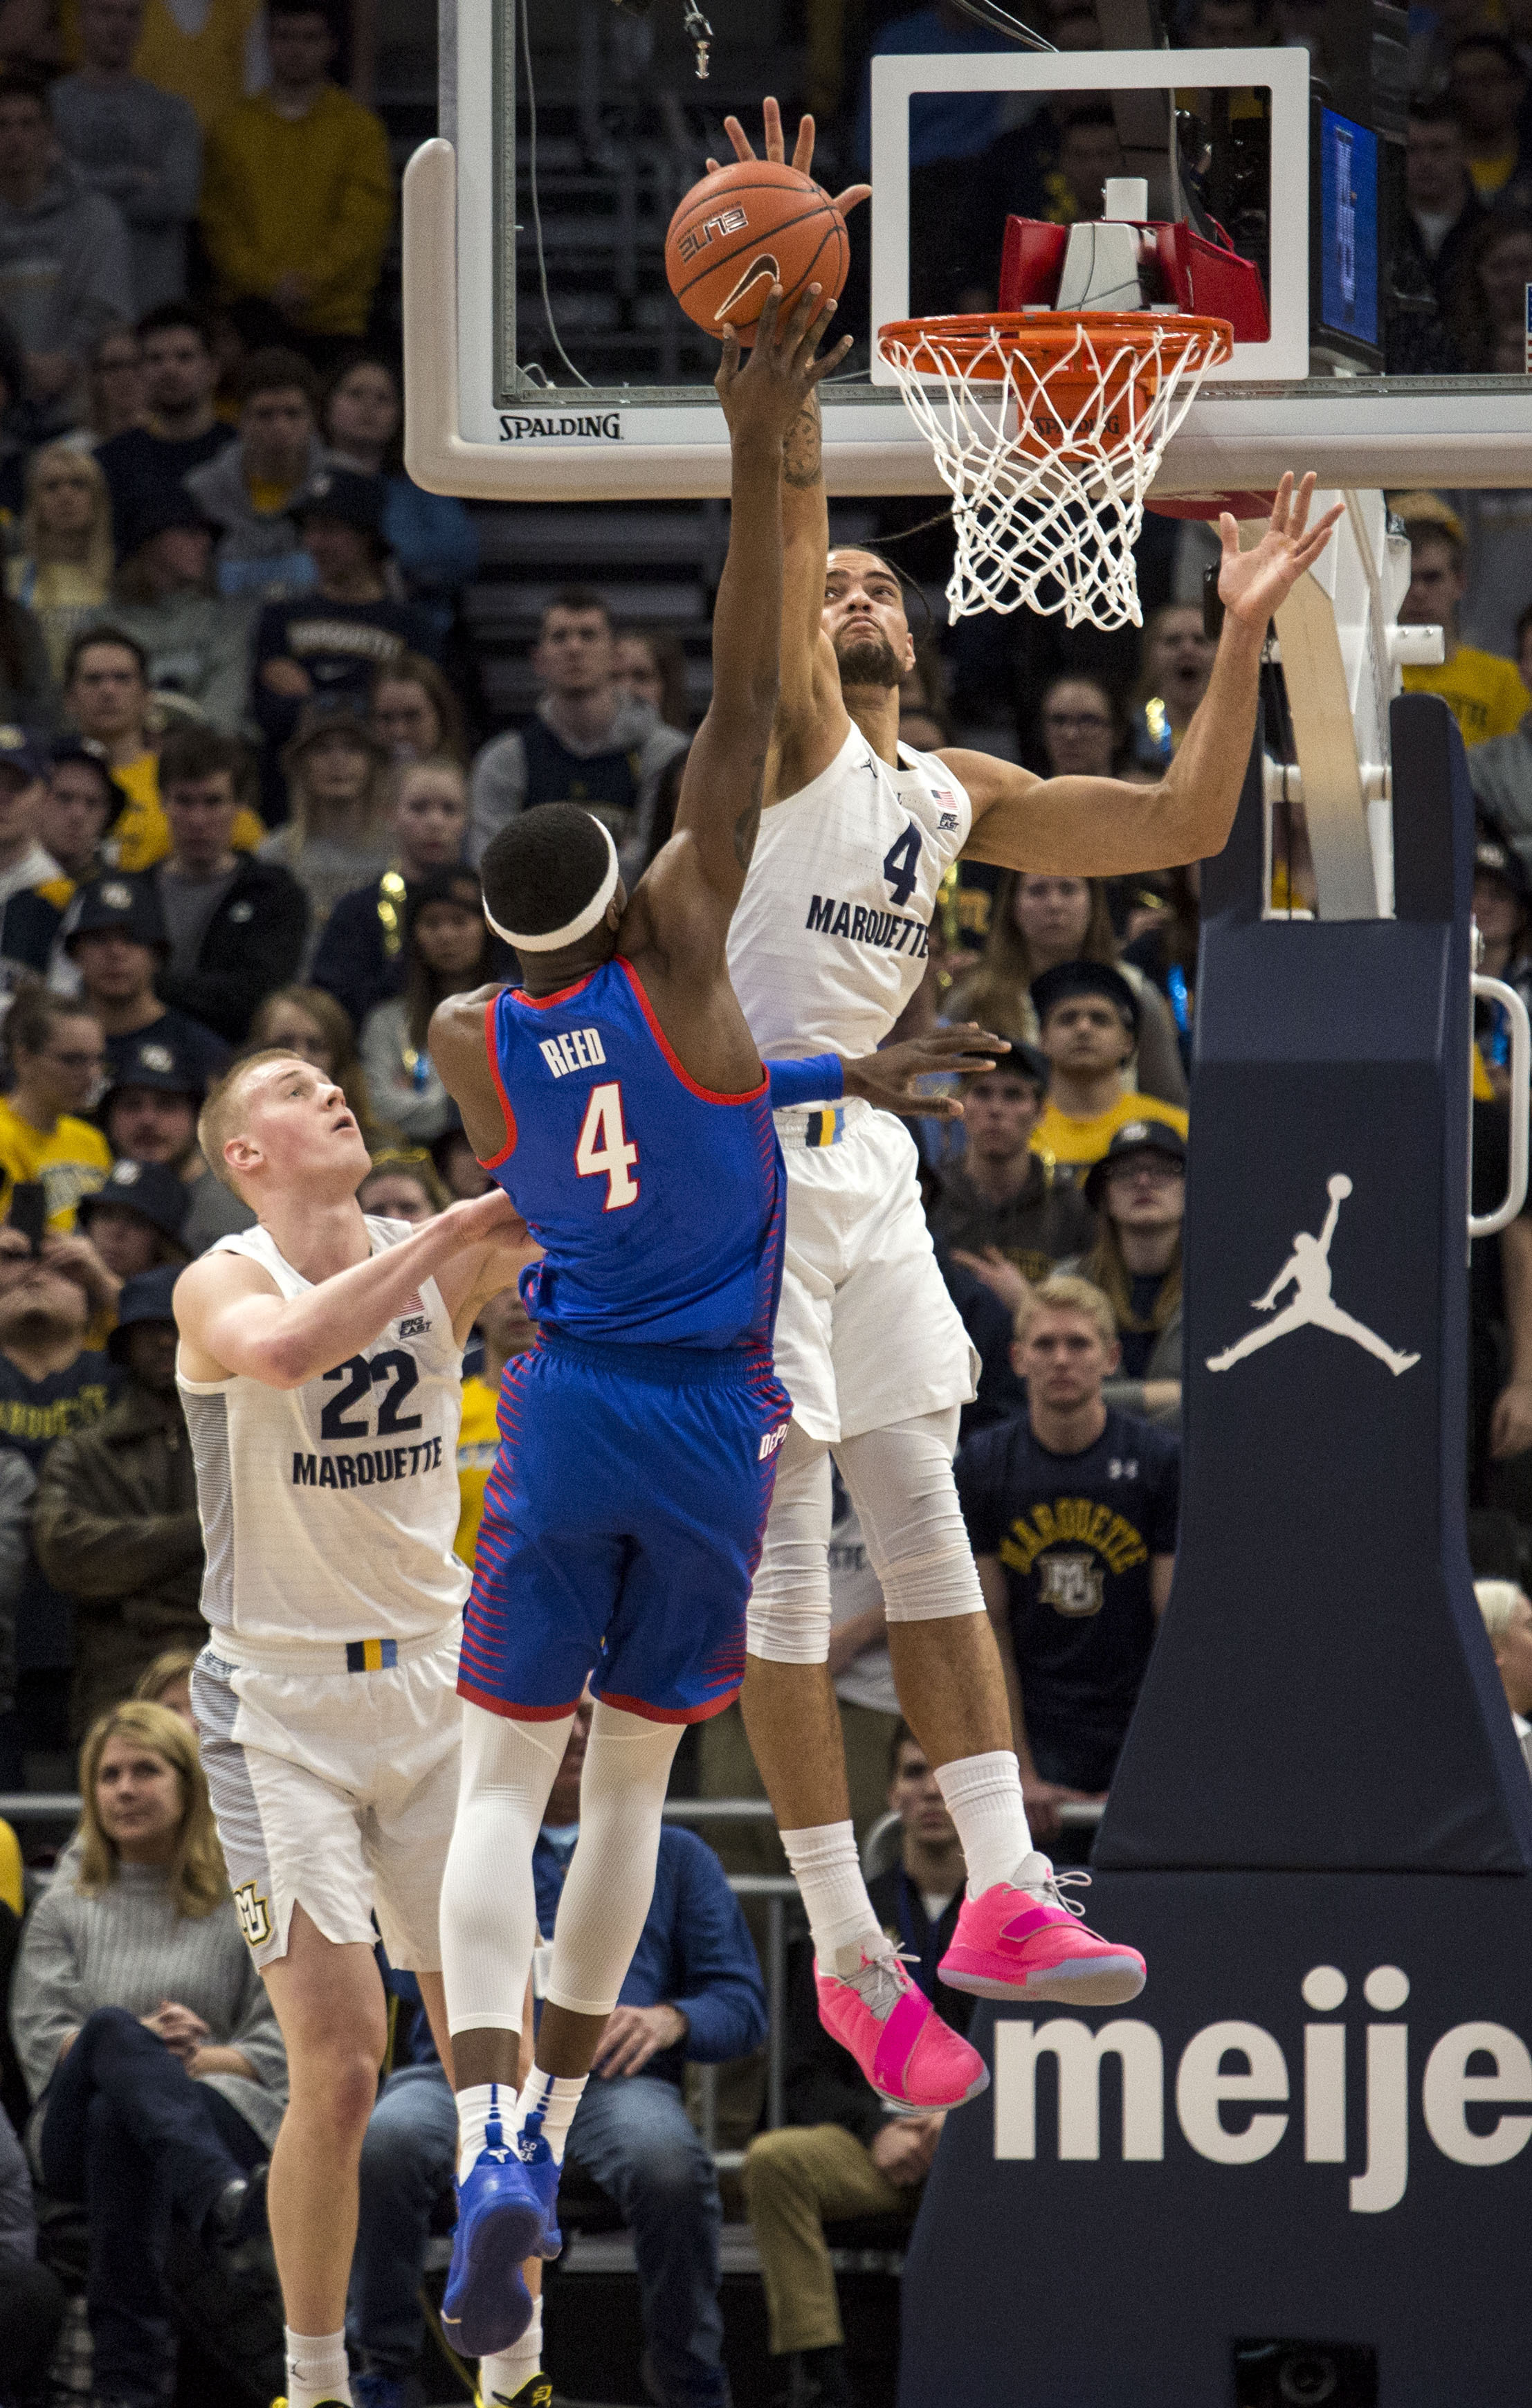 Howard scores 23 as No. 12 Marquette holds off DePaul 79-69